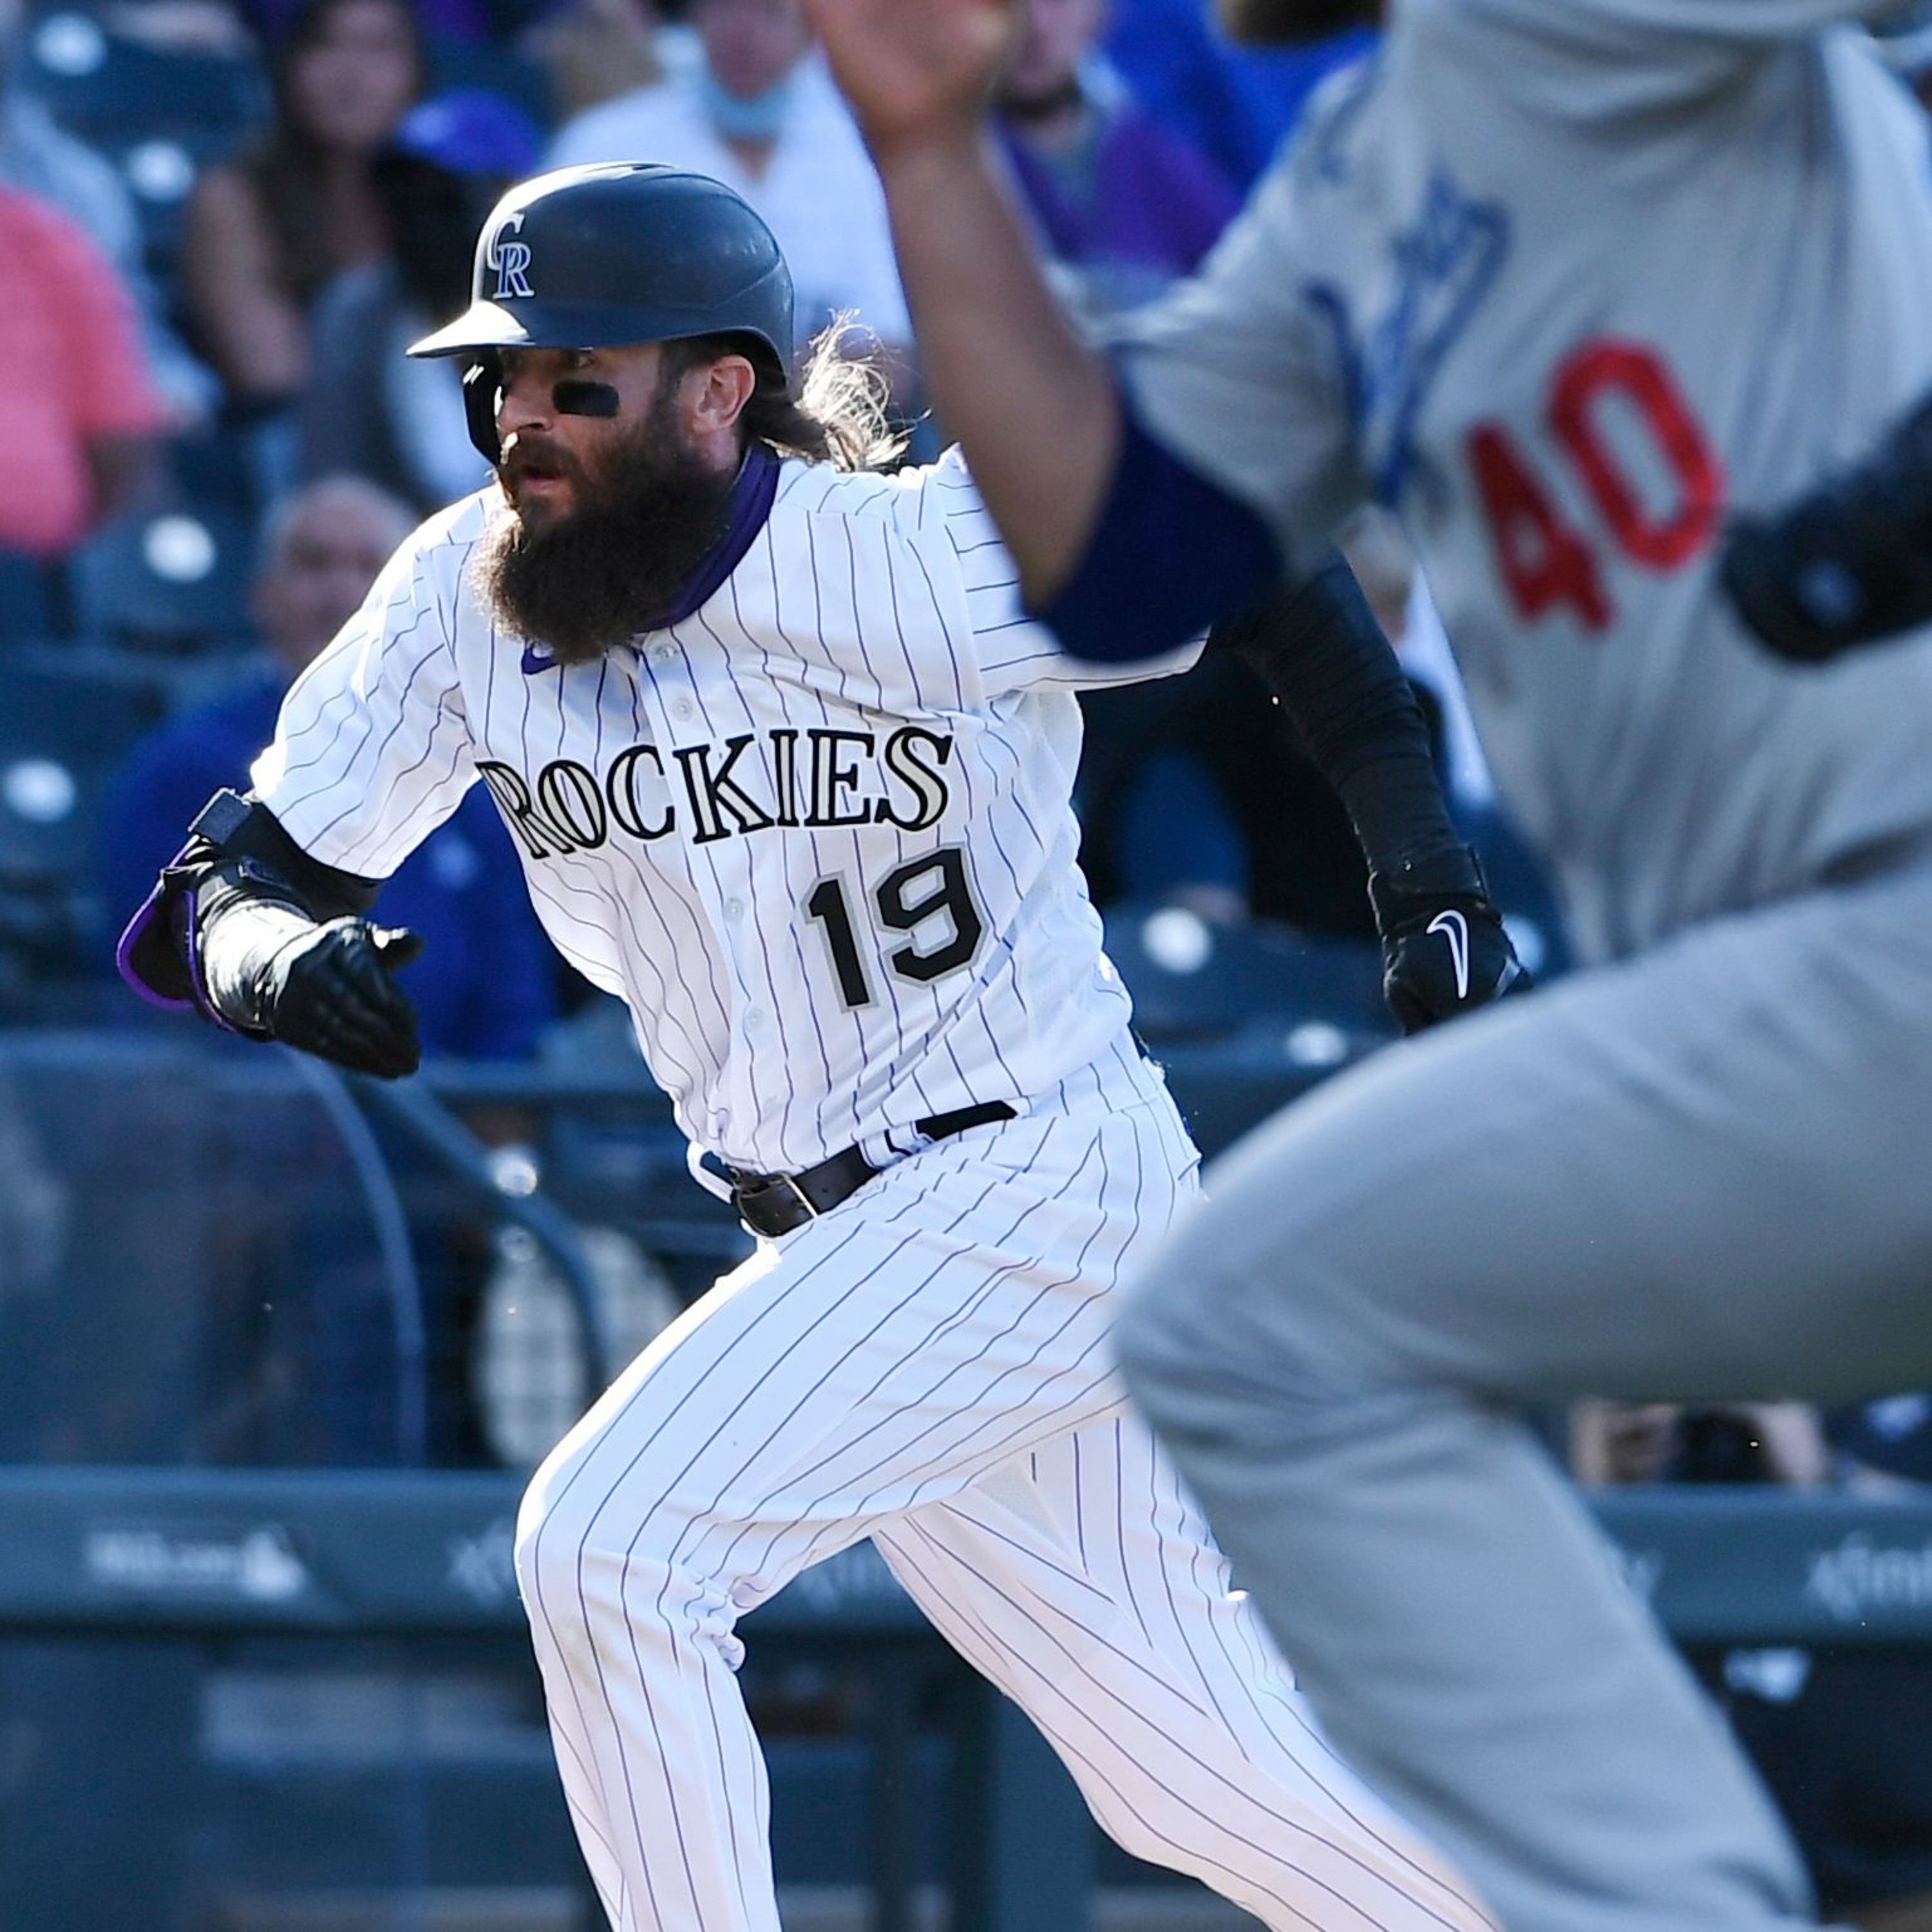 Ep. 169 -- Breaking down Charlie Blackmon’s legacy with the Rockies, plus potential deadline trades